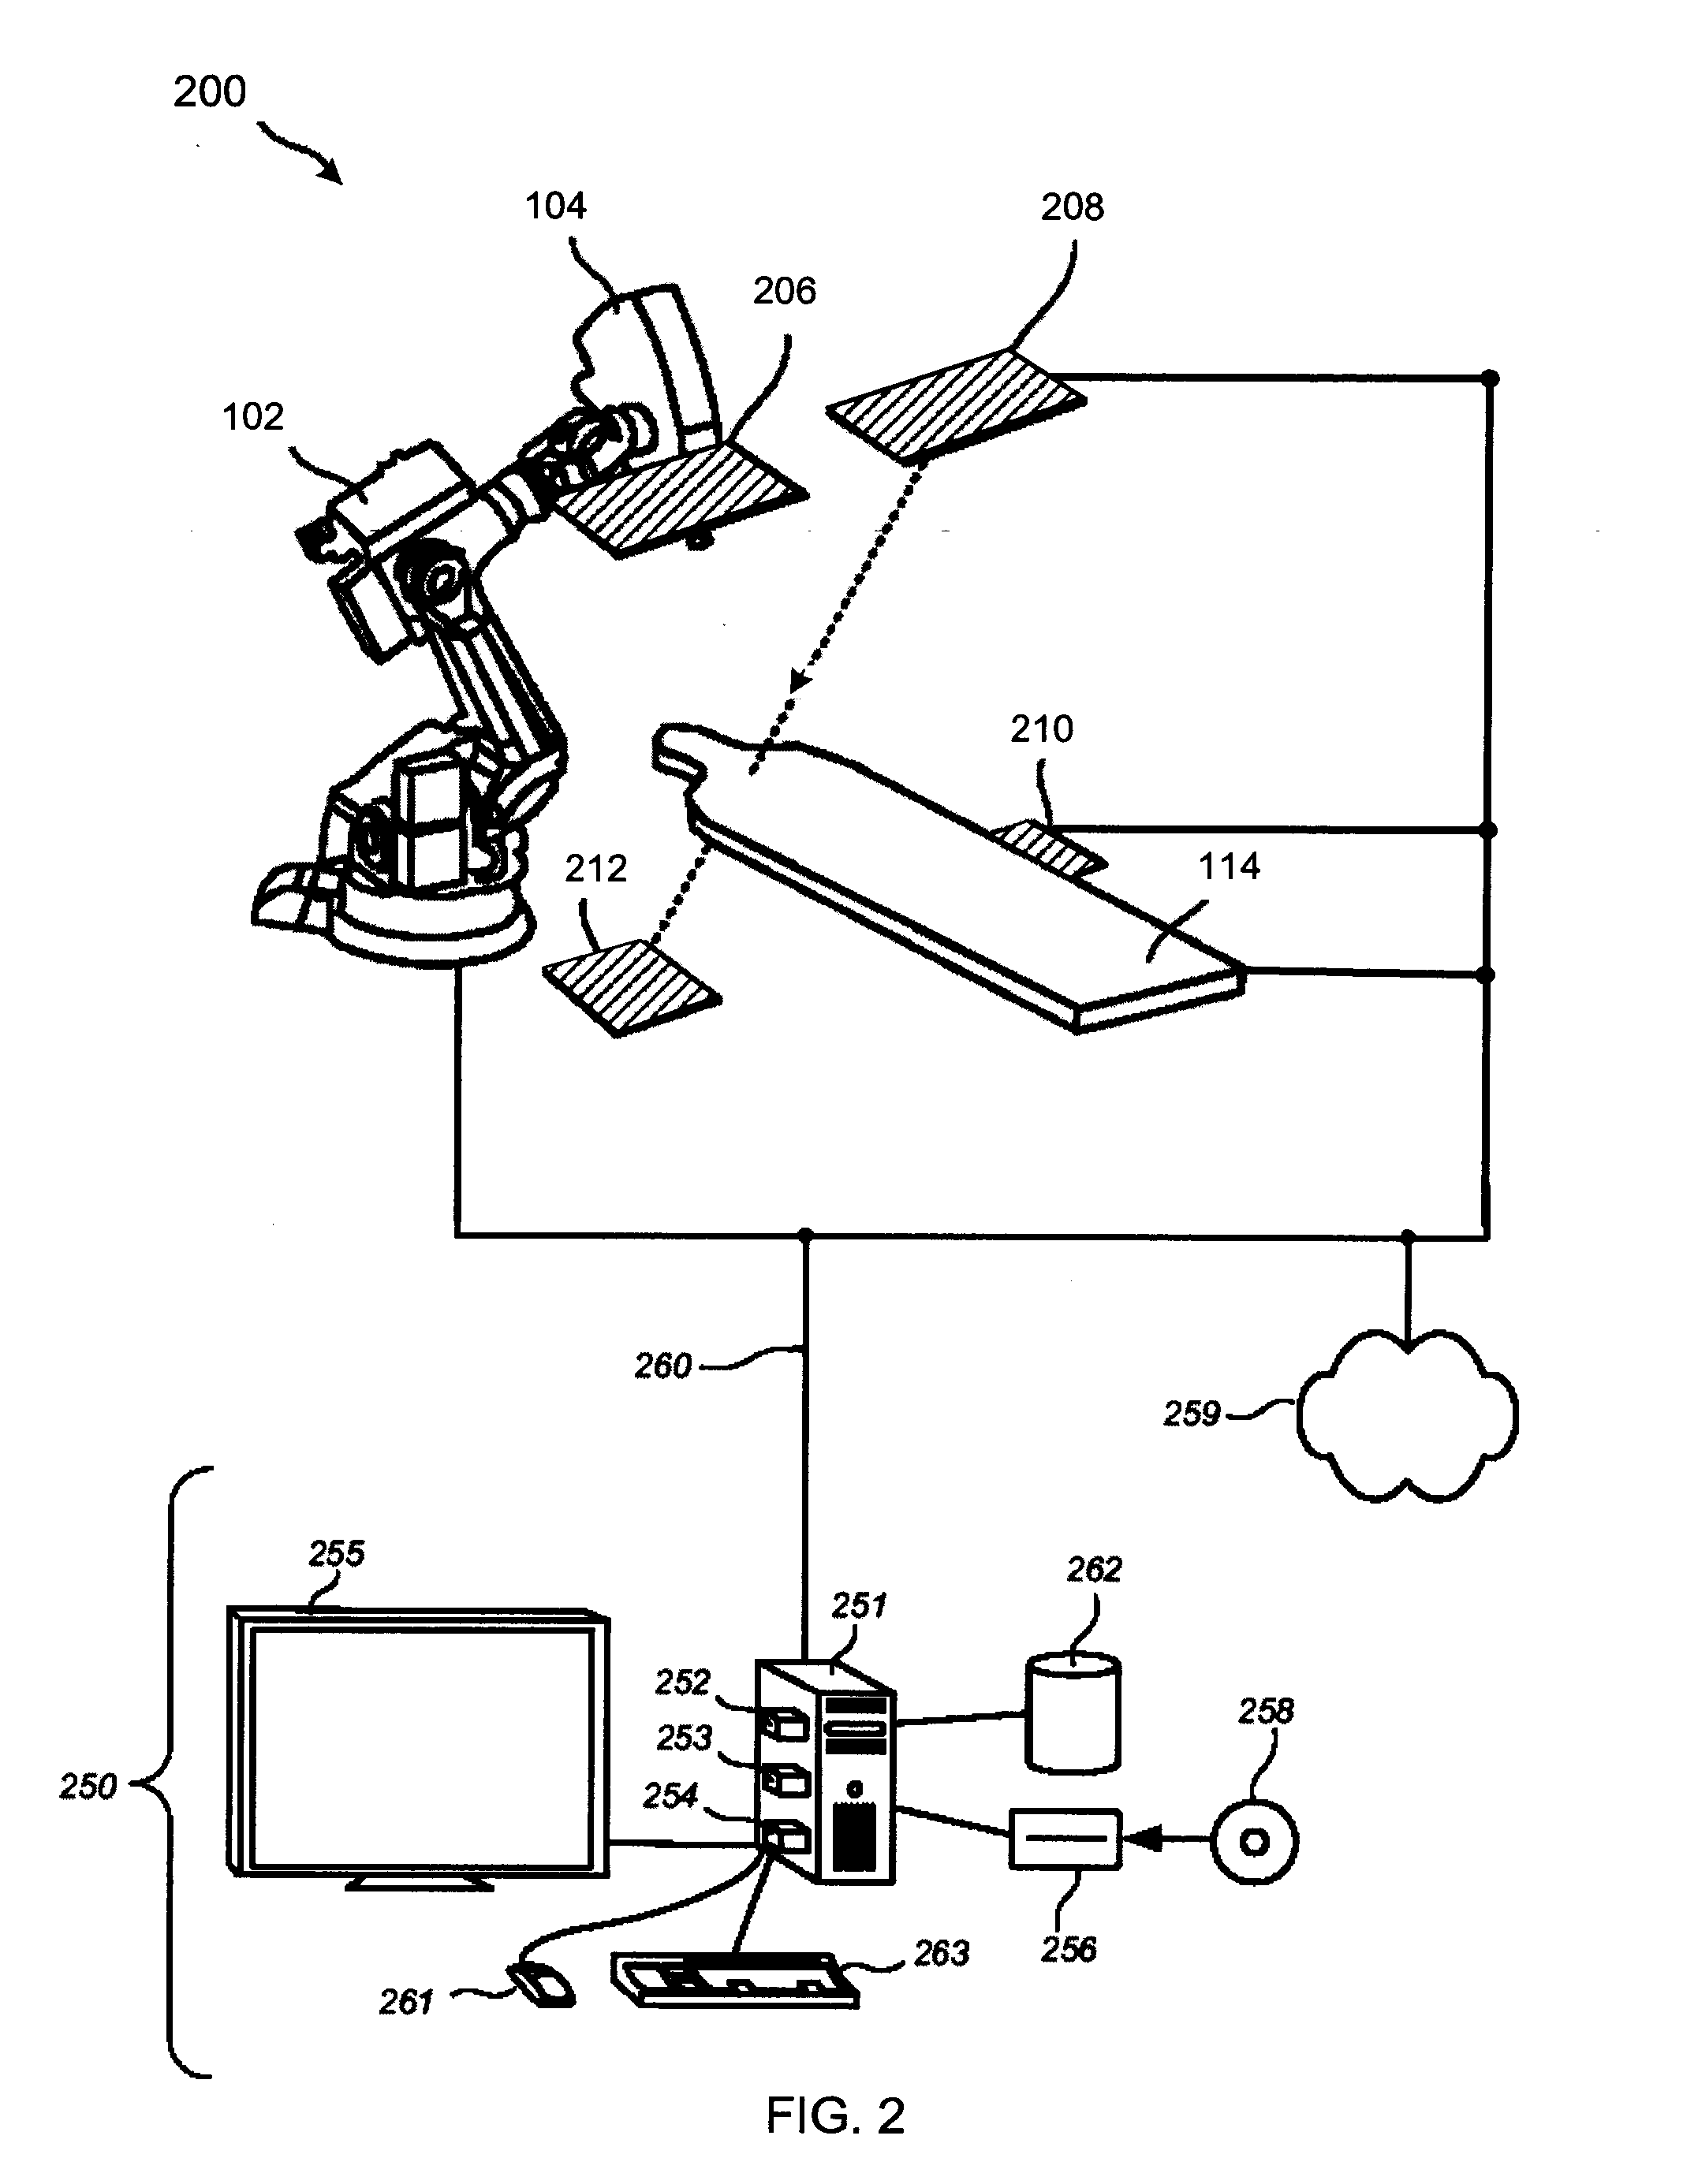 Apparatus for generating multi-energy x-ray images and methods of using the same